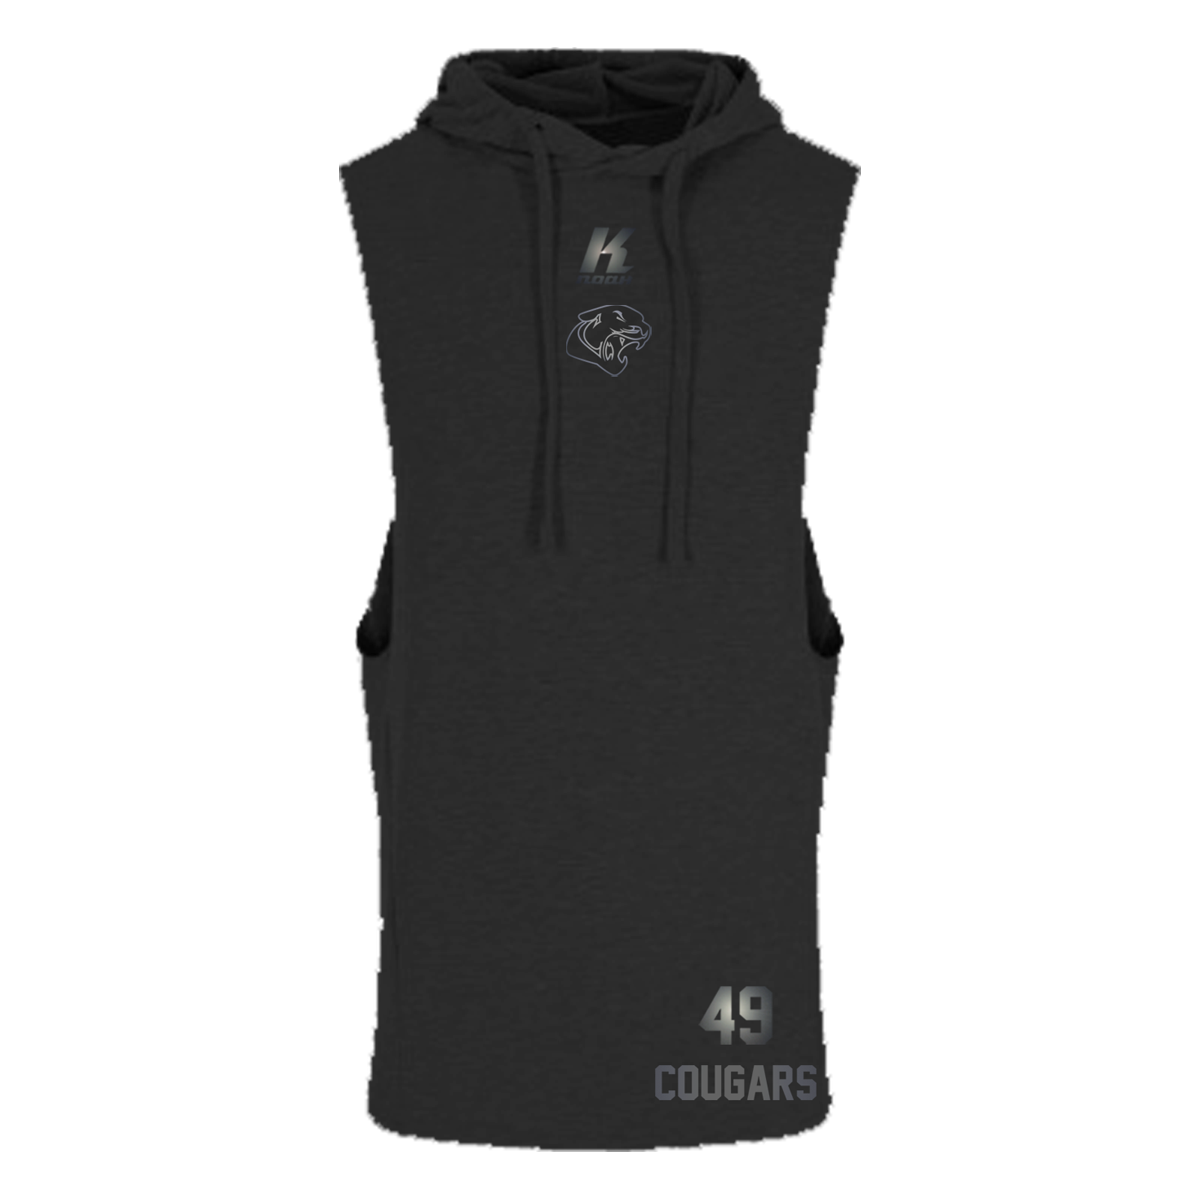 Cougars "Blackline" Sleeveless Muscle Hoodie JC053 with Playernumber or Initials